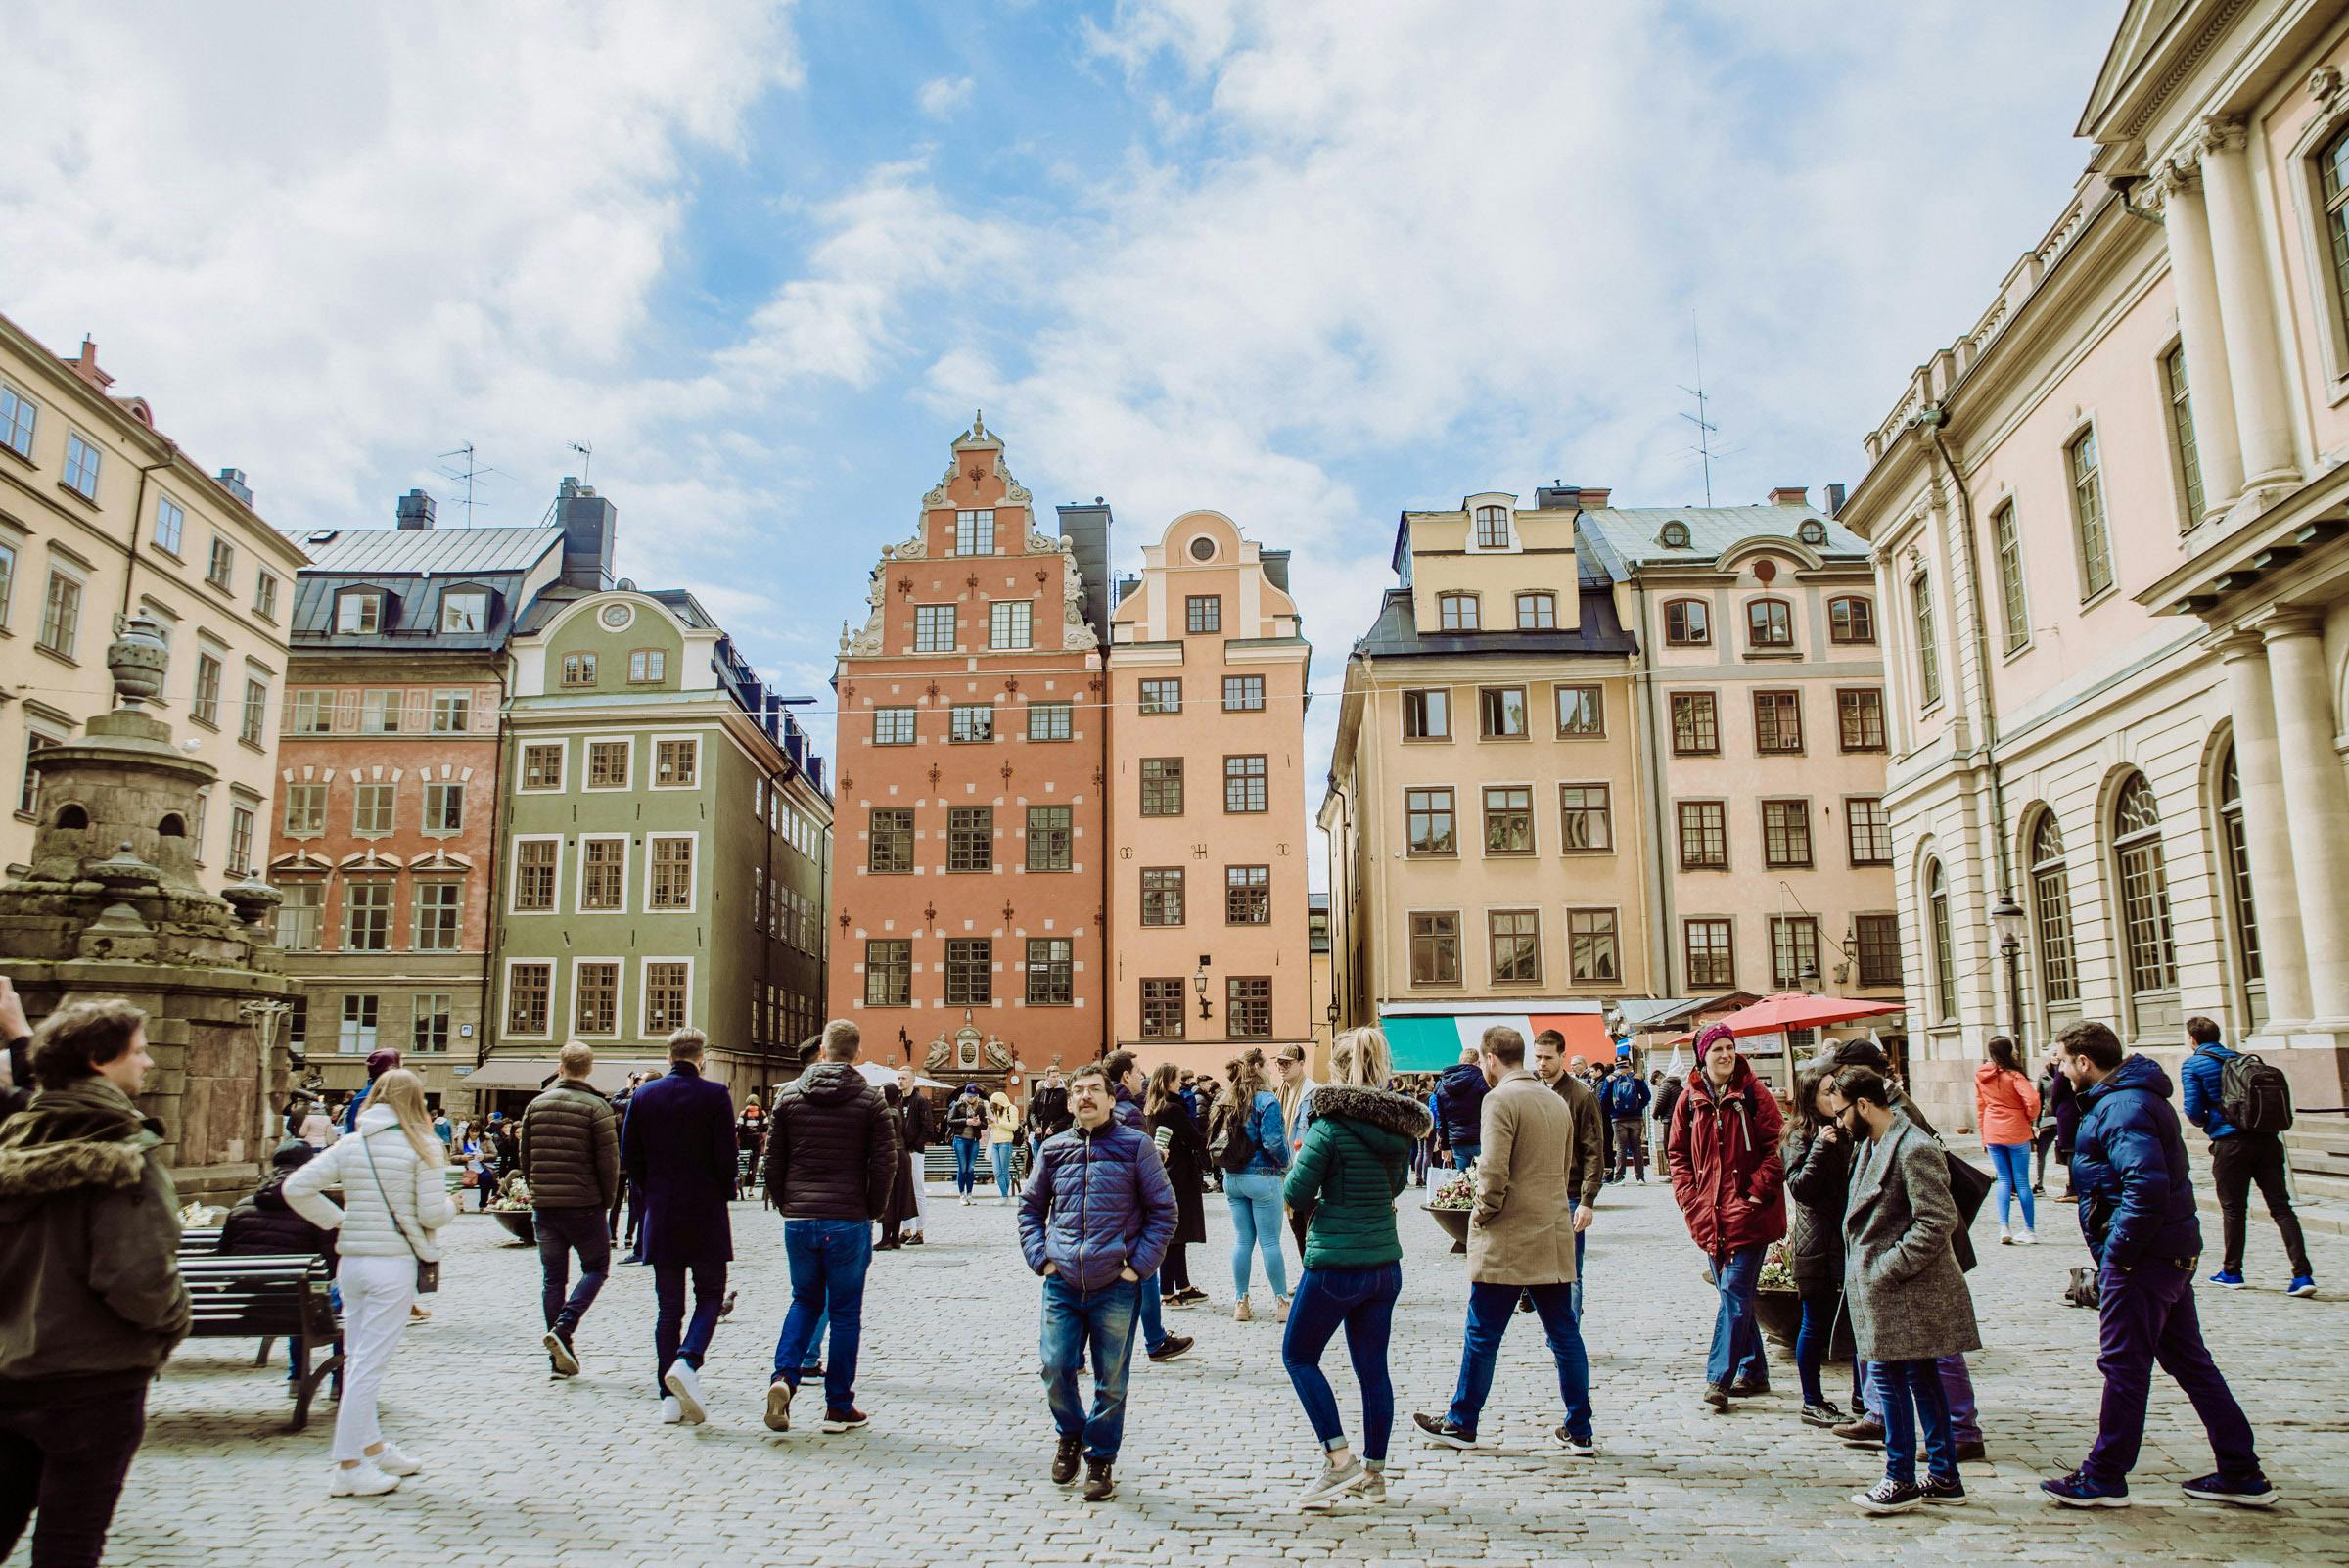 Enjoy a personalized half day tour in Stockholm with local Musement